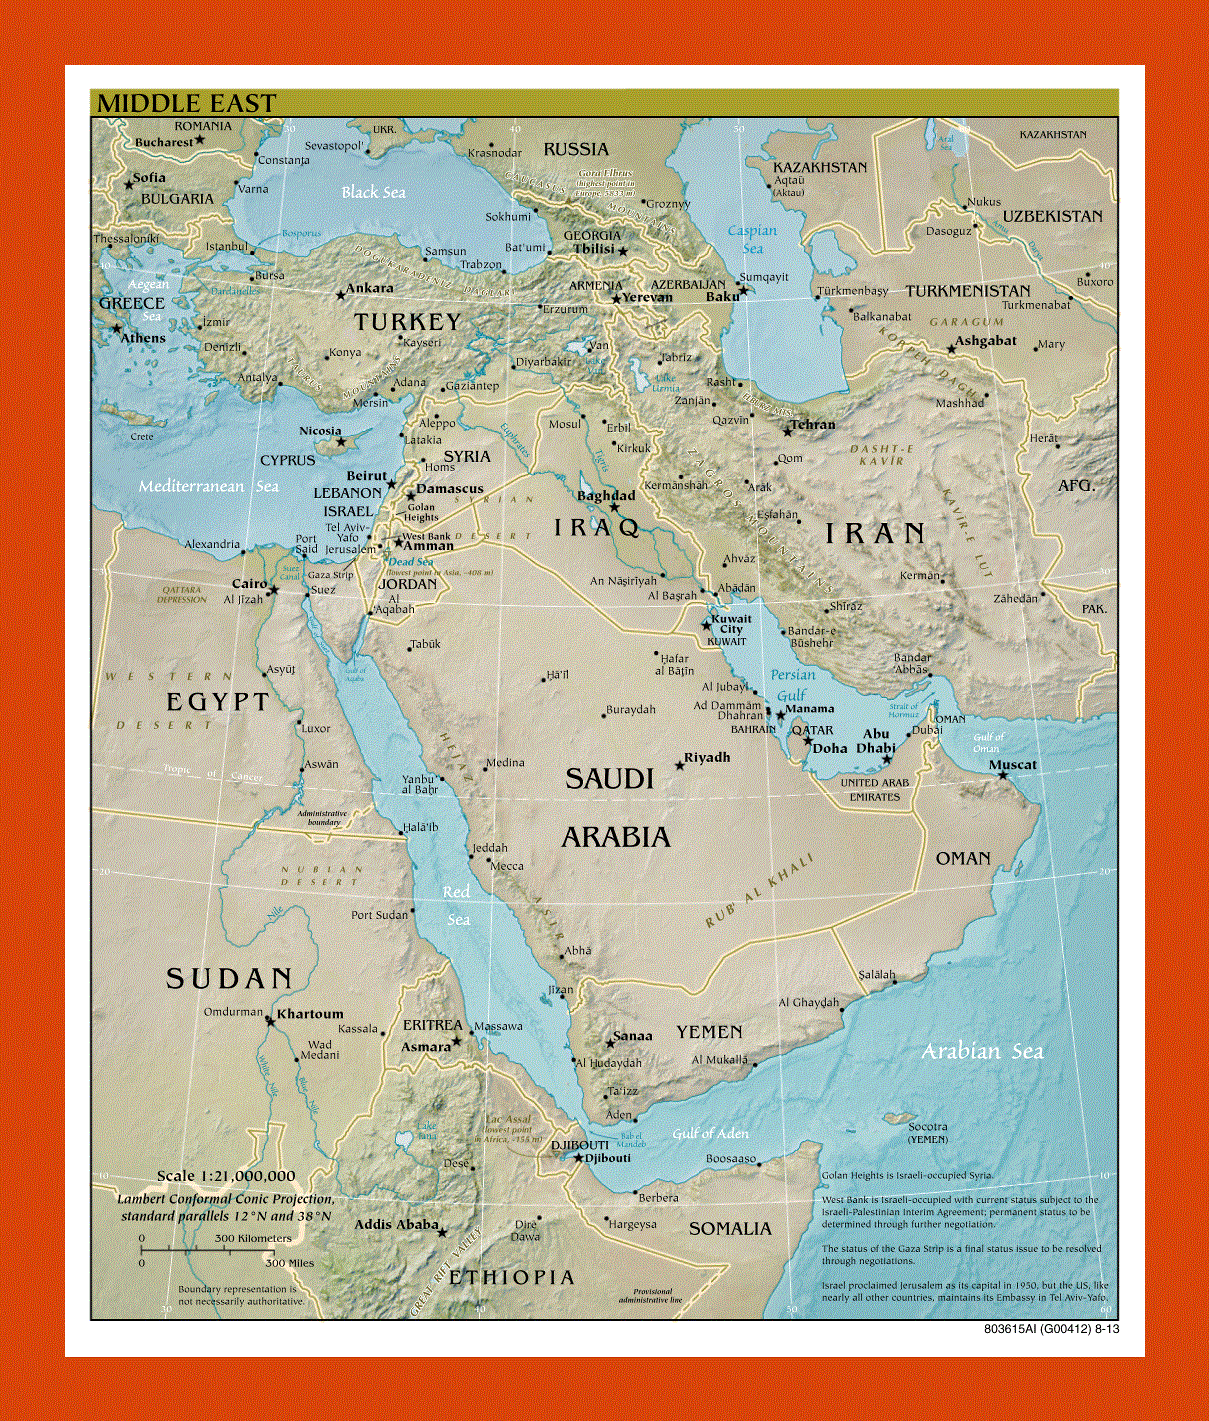 Political map of the Middle East - 2013